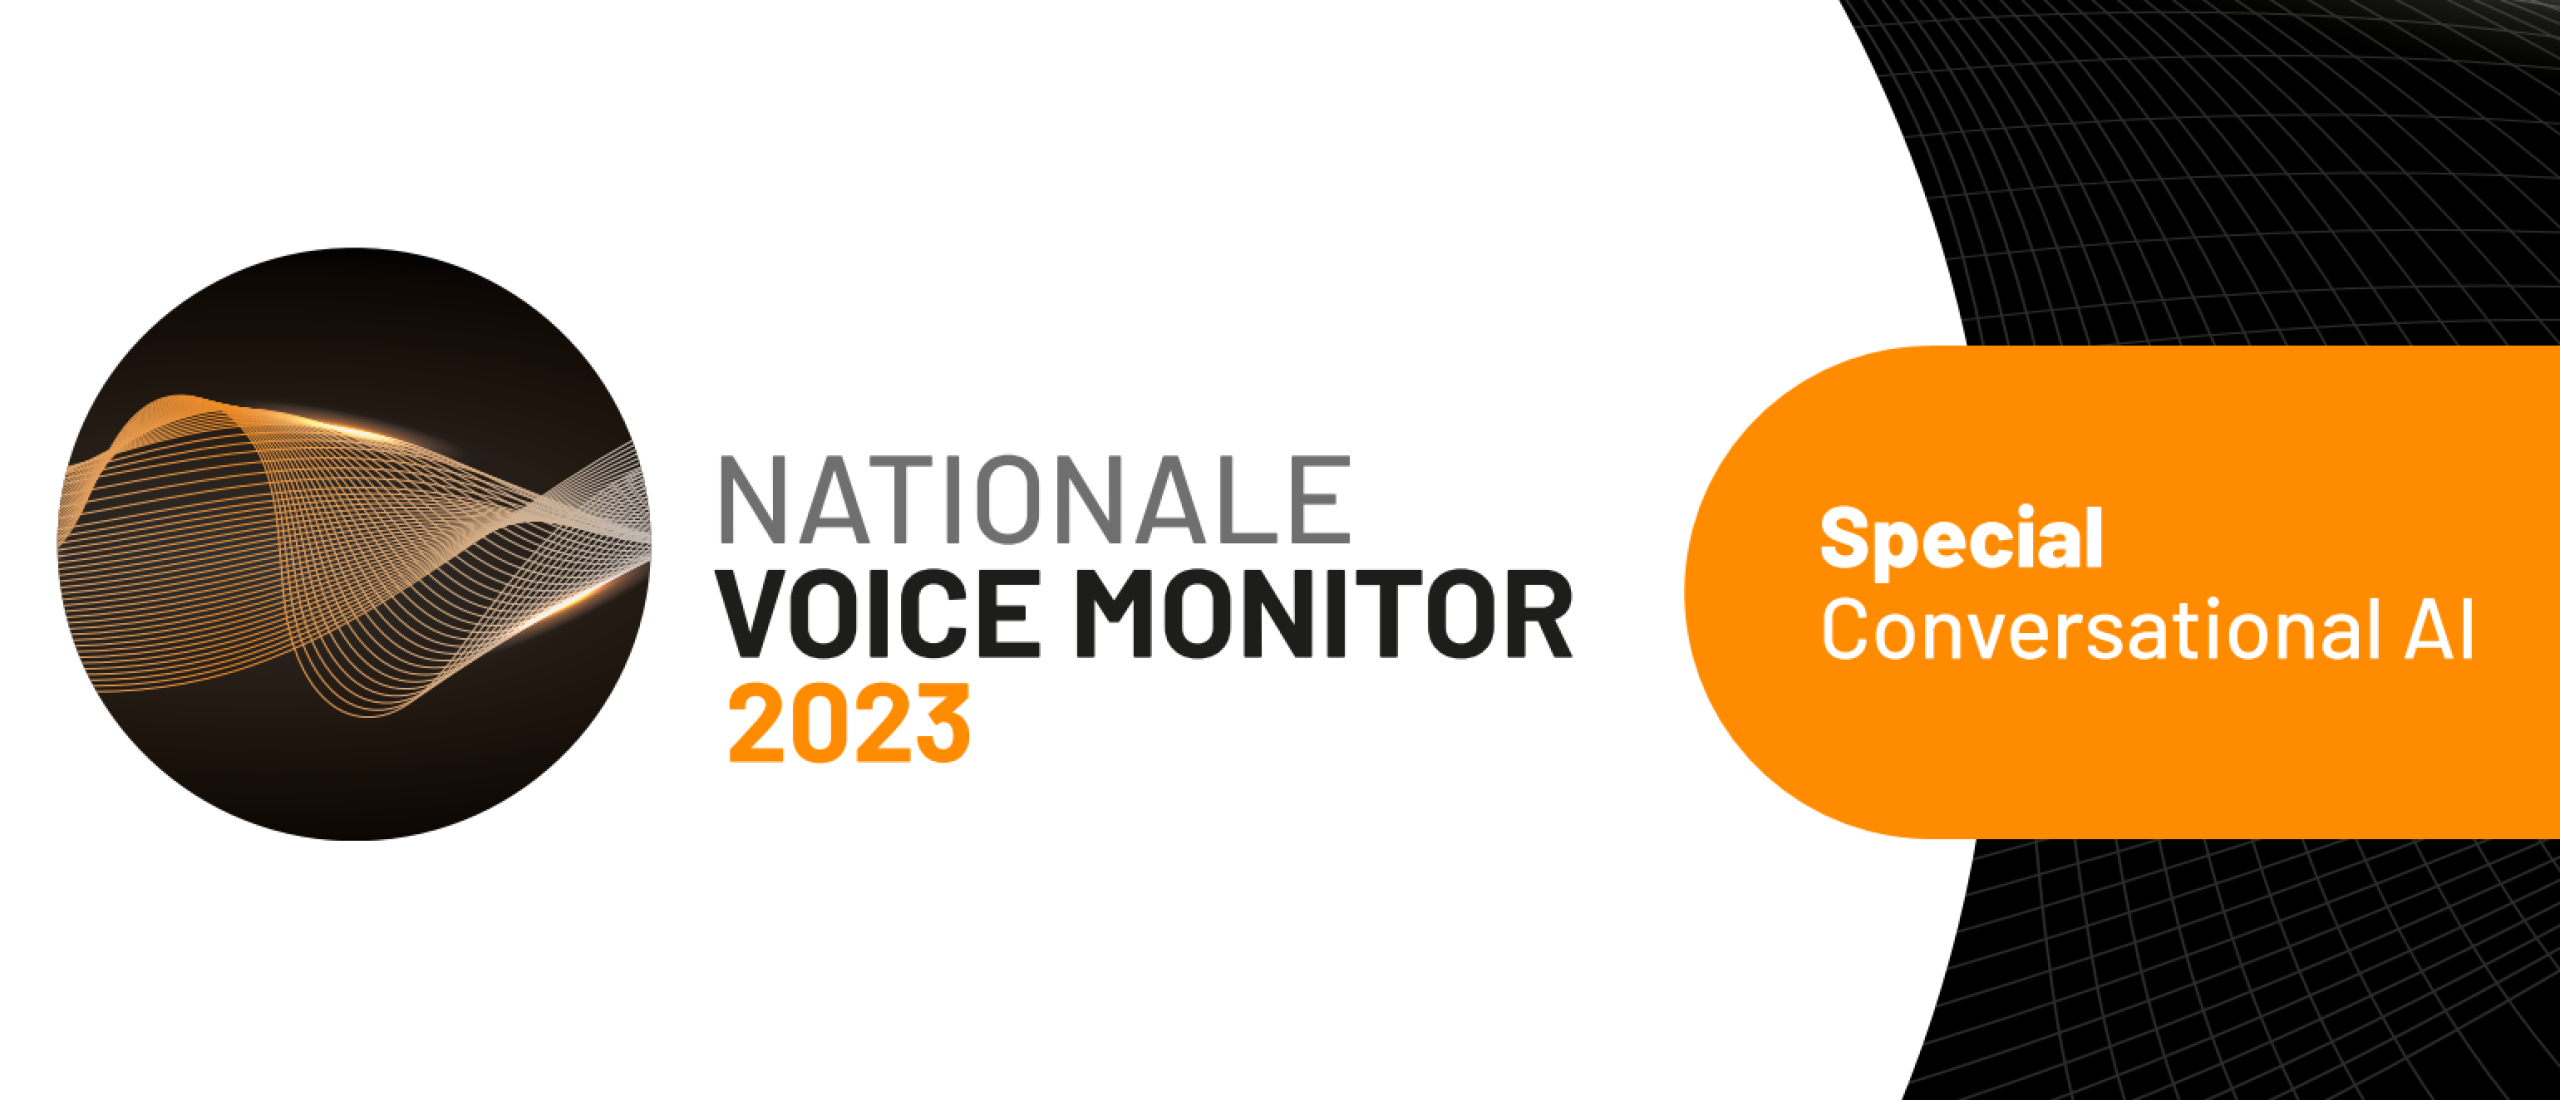 Nationale Voice Monitor 2023